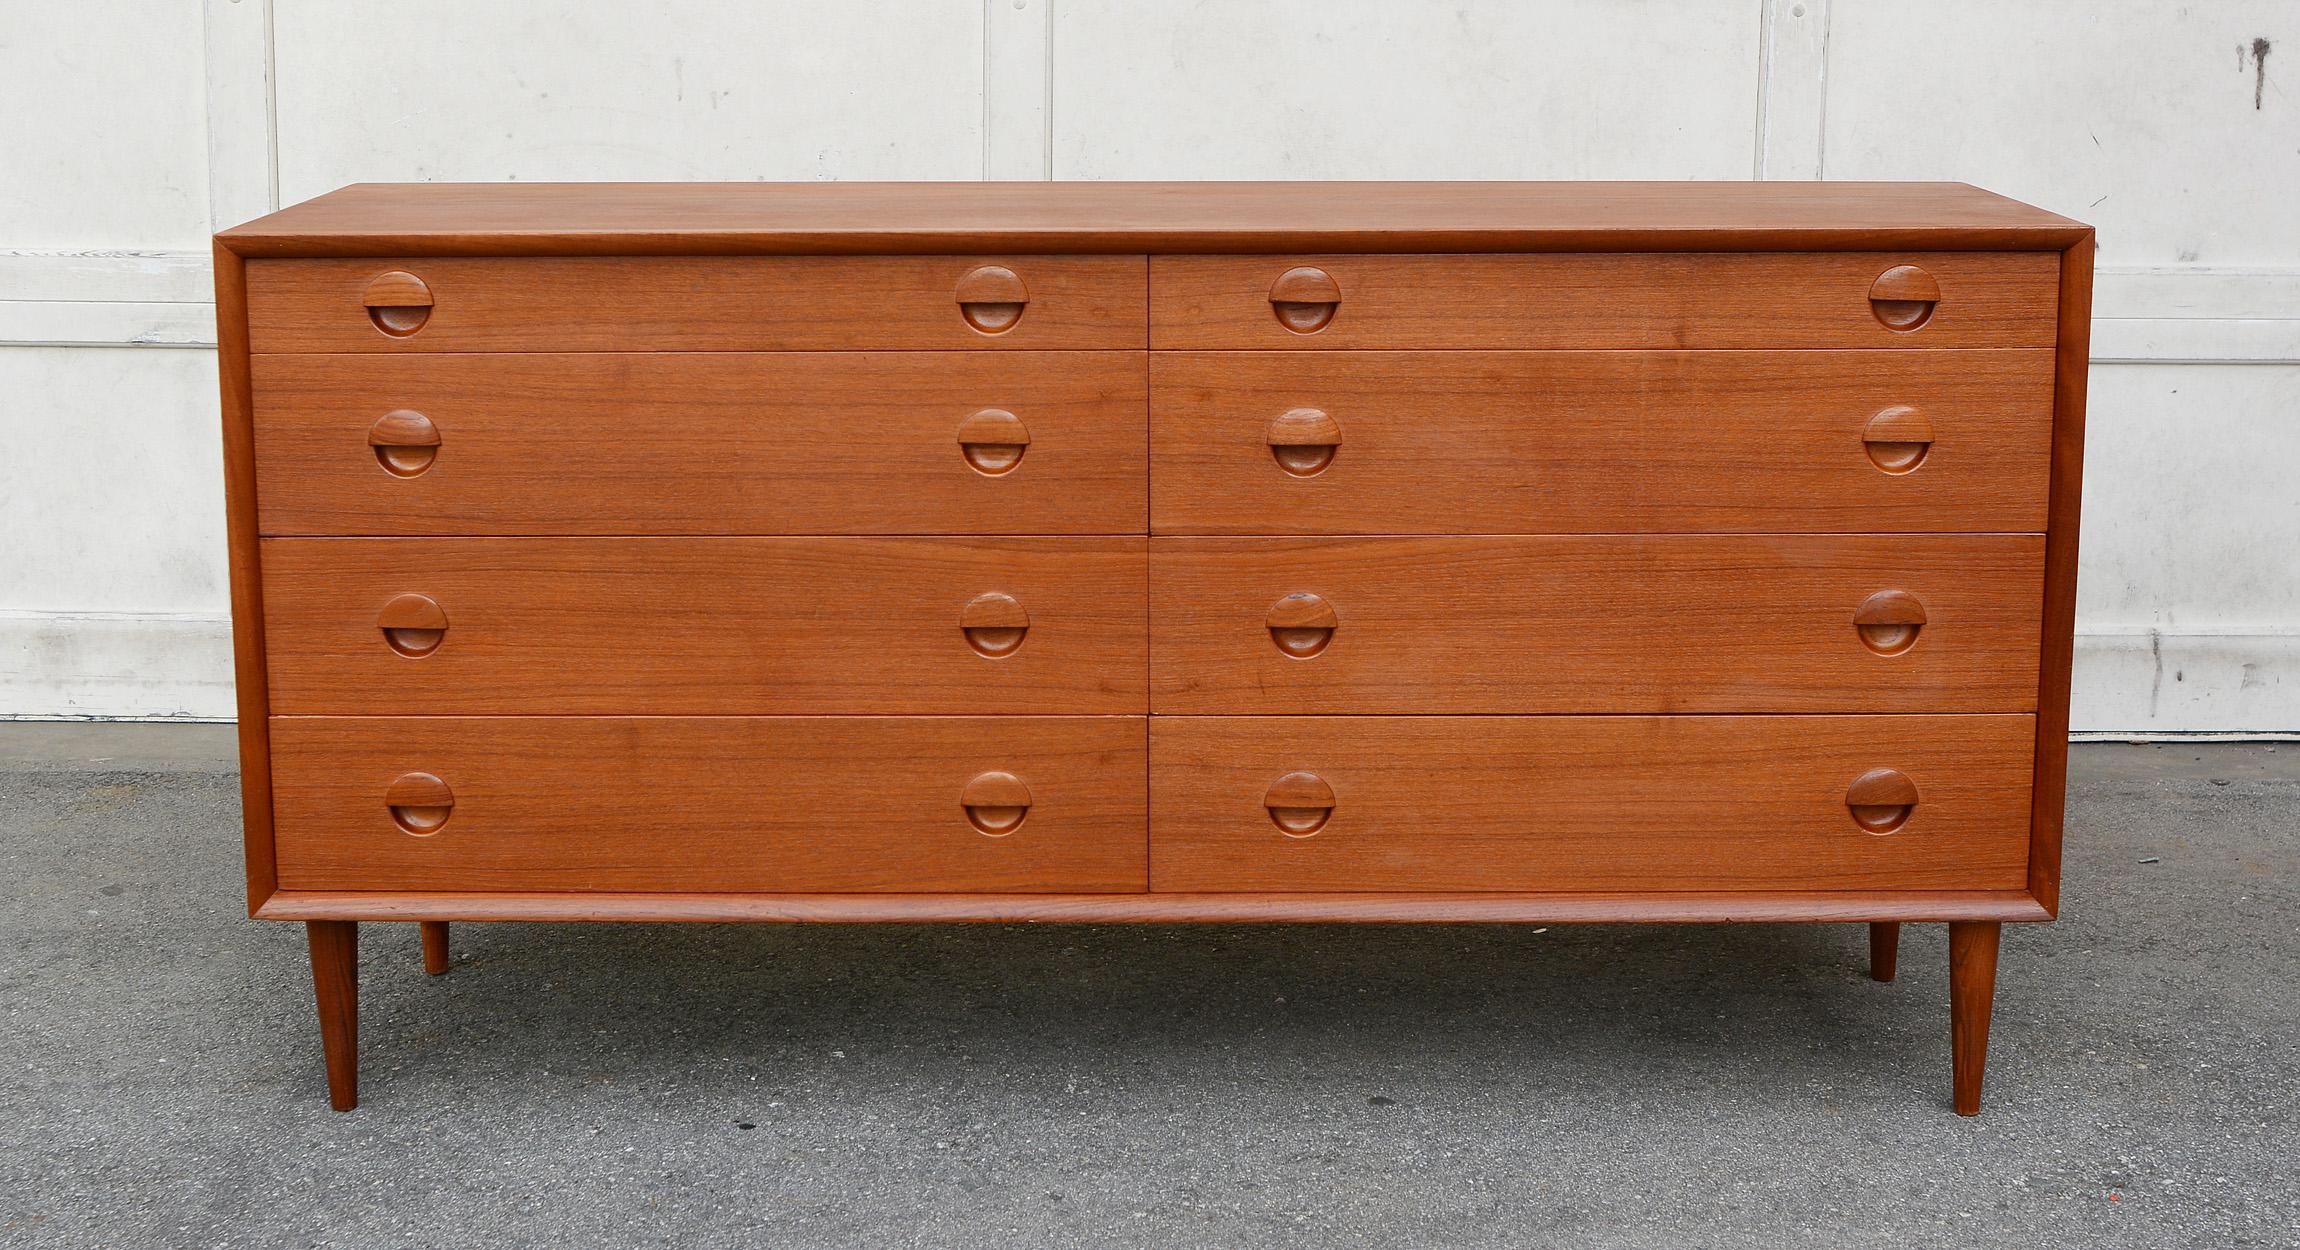 Midcentury dresser designed by Grete Jalk for Sibast Furniture, Denmark. This features eight drawers with dividers in the two top drawers. There are a couple of small chips on the corners of two drawers and the back right corner has a small chip.